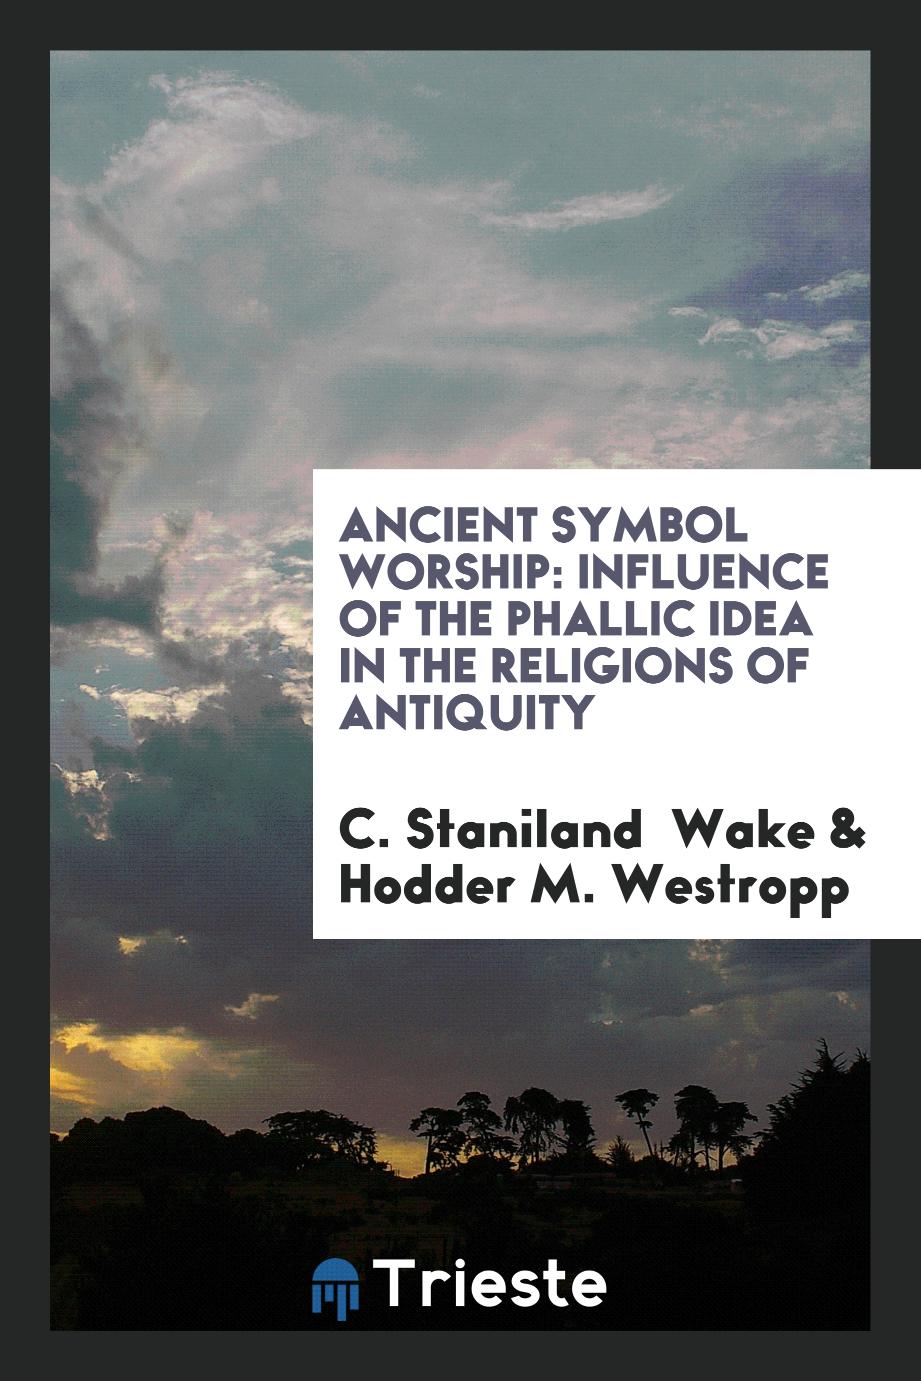 Ancient Symbol Worship: Influence of the Phallic Idea in the Religions of Antiquity